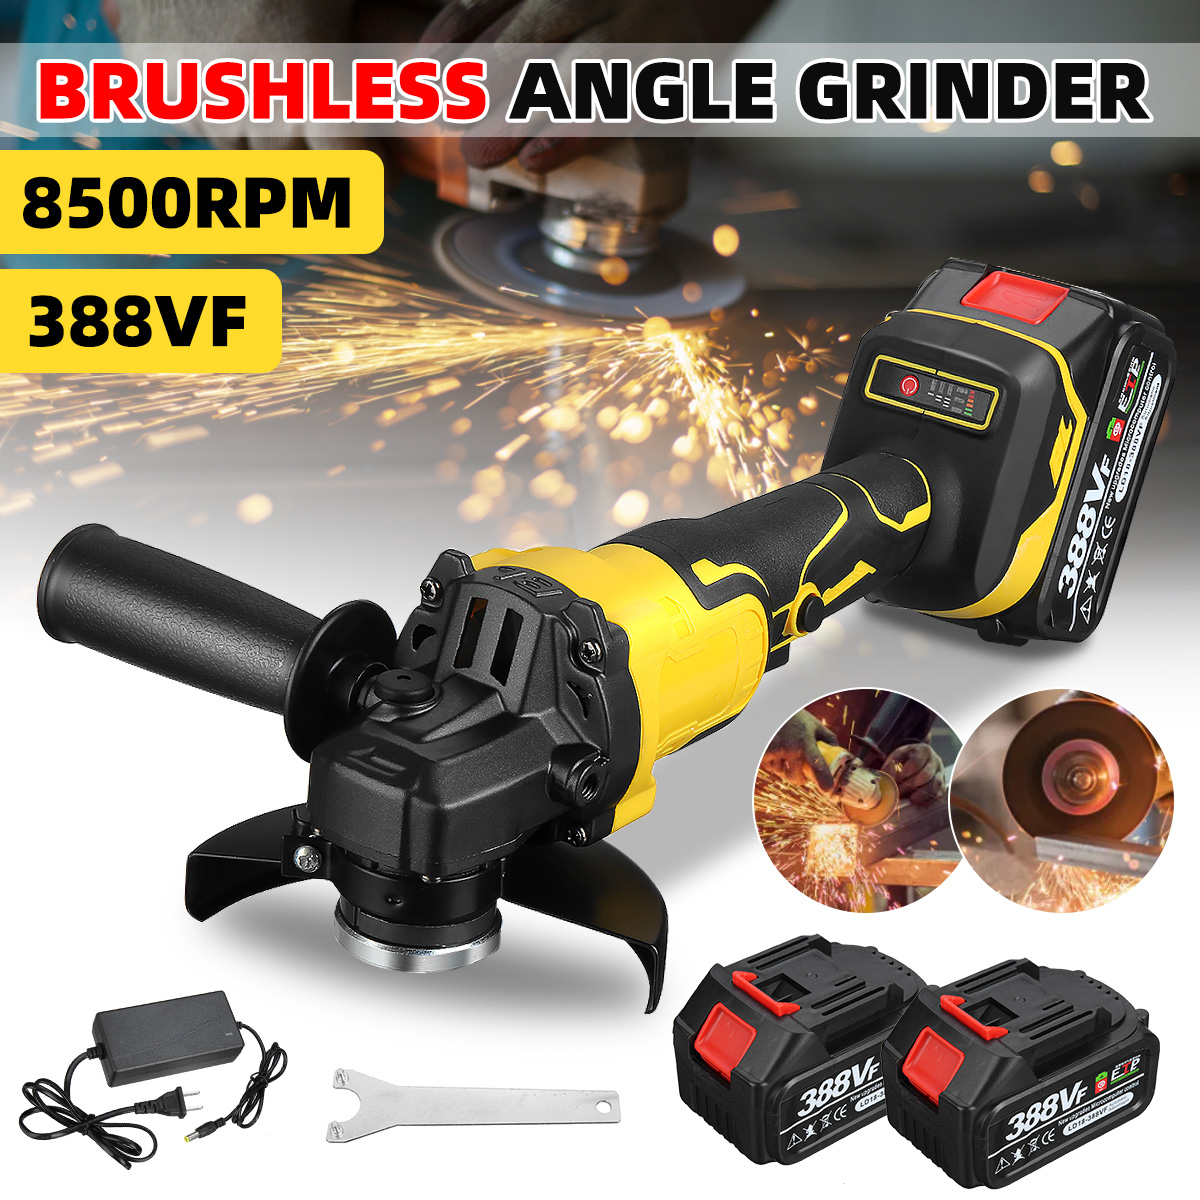 Drillpro-388VF-1280W-8500rpm-3-gears-125mm-Brushless-Lithium-Electric-Angle-Grinder-for-Makiita-18V--1962826-5